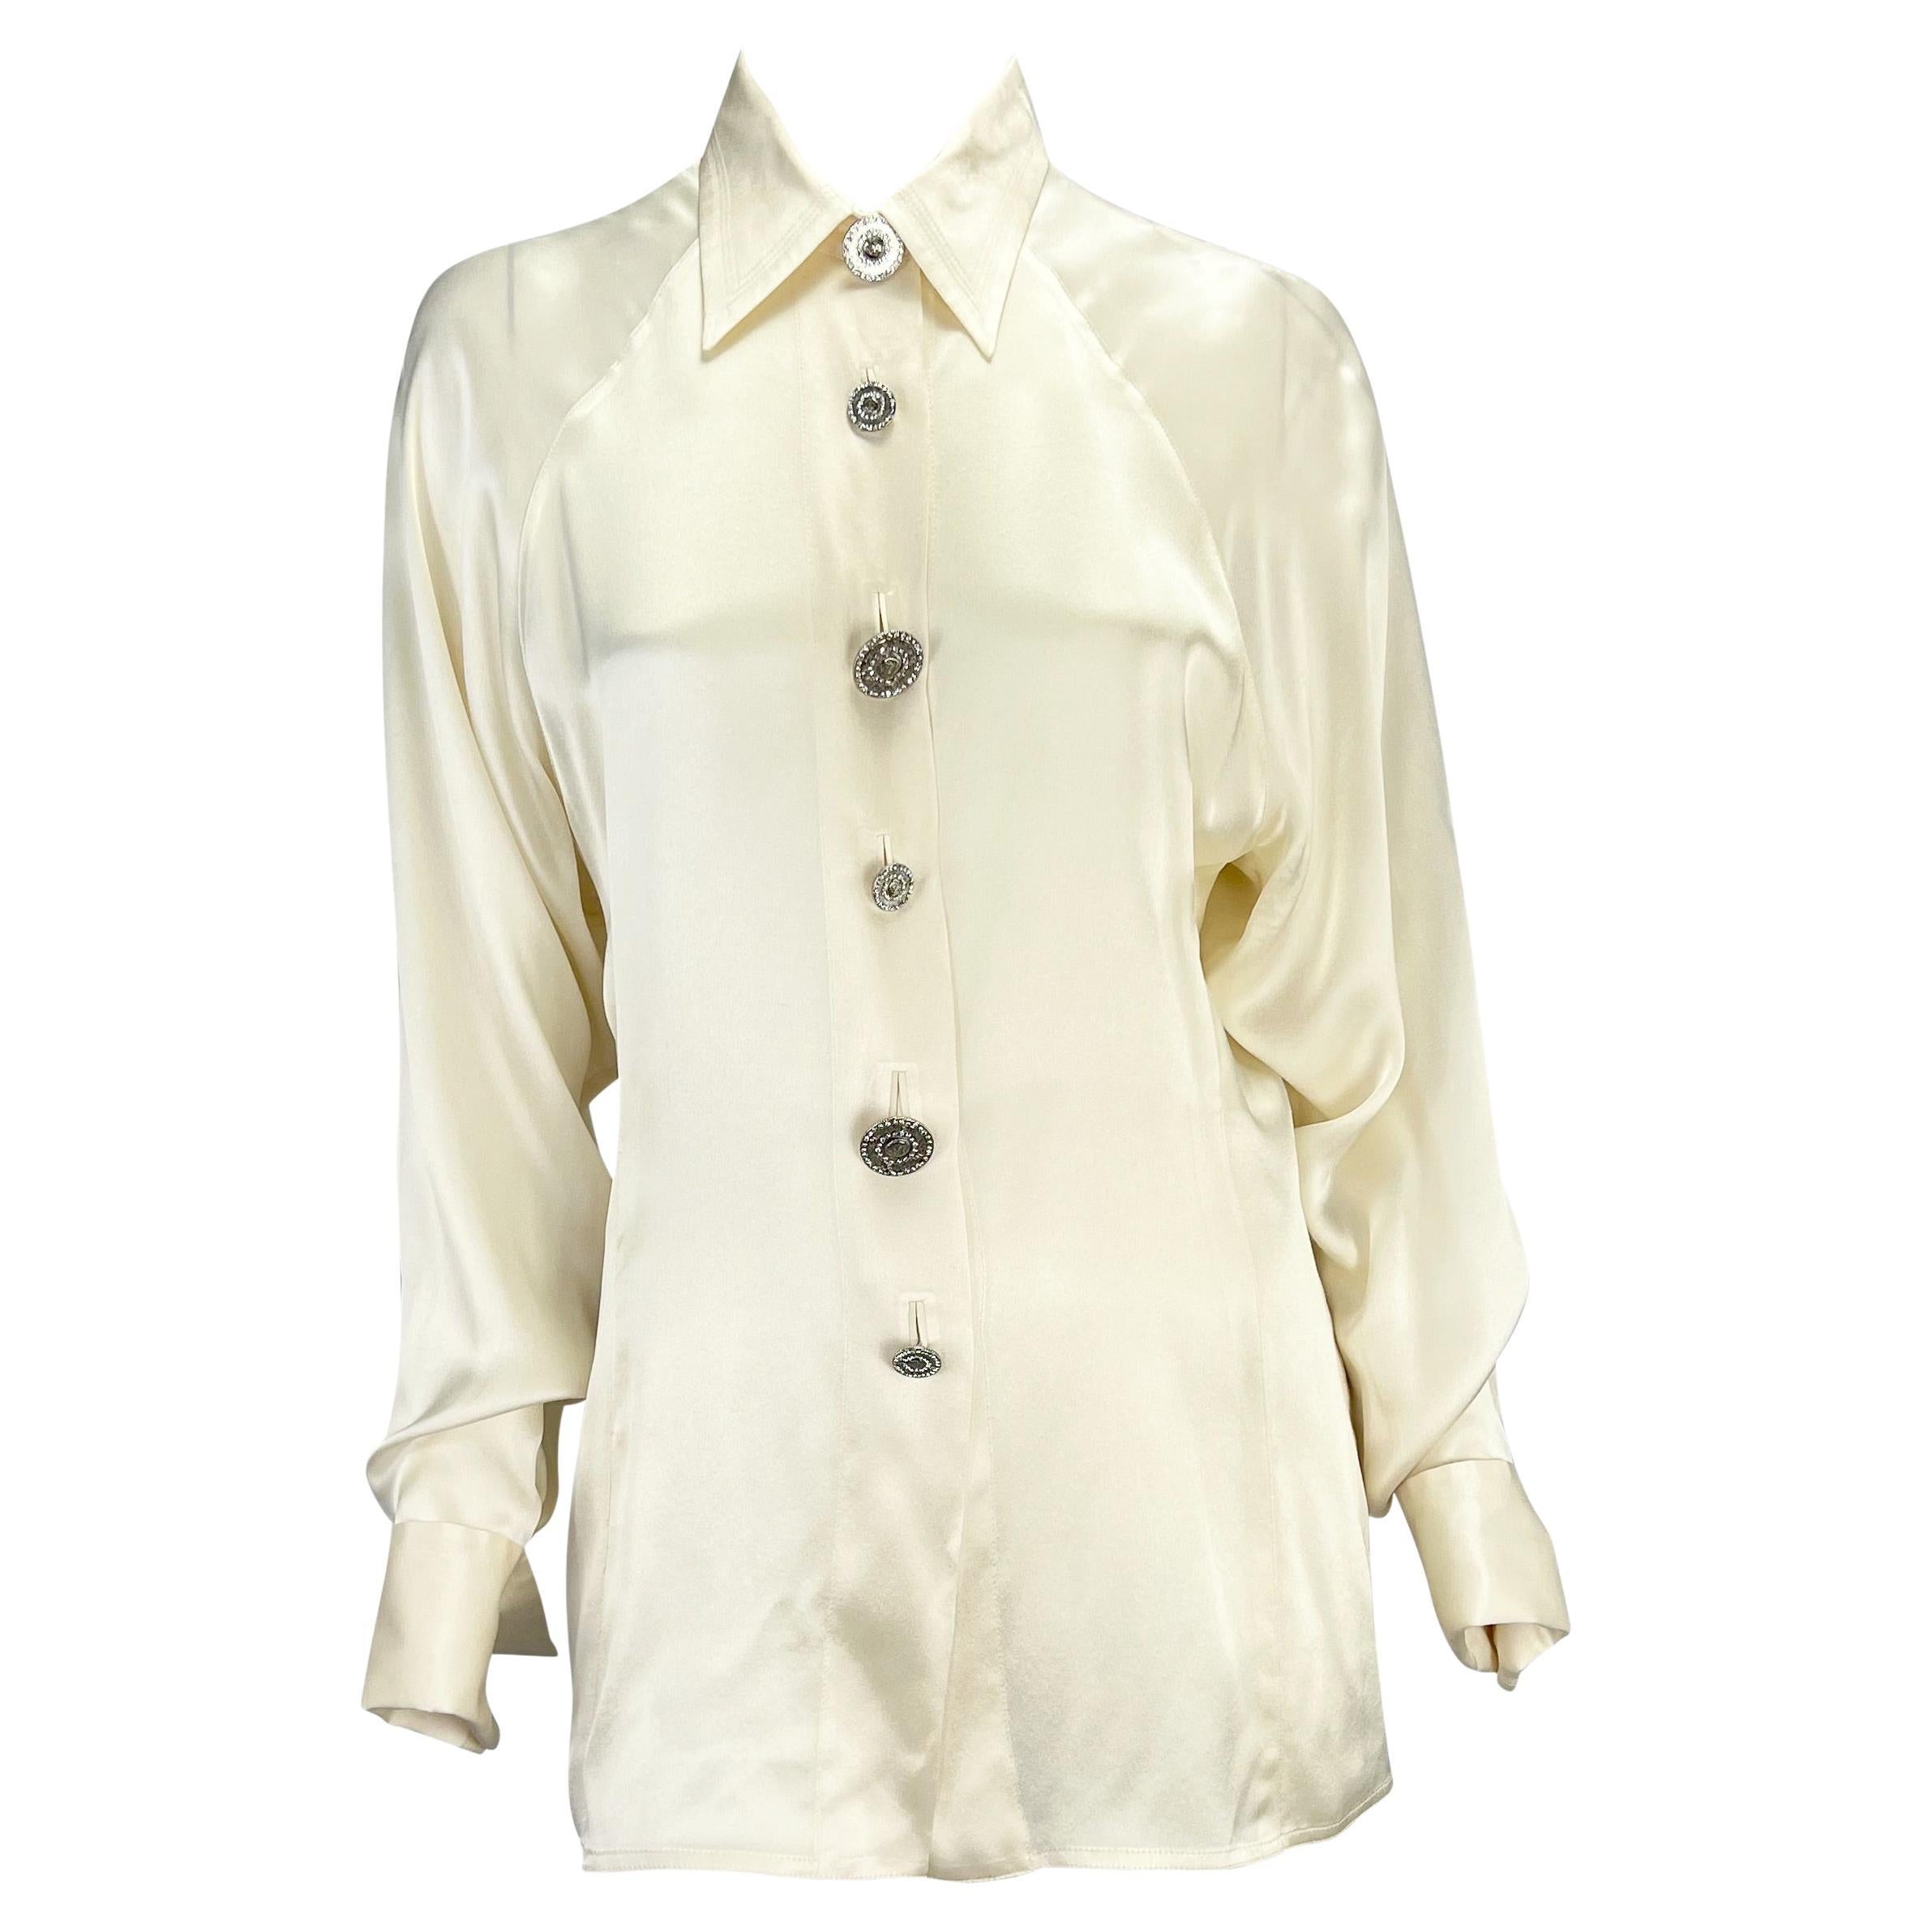 1990s Gianni Versace Couture White Rhinestone Medusa French Cuff Button Up Top